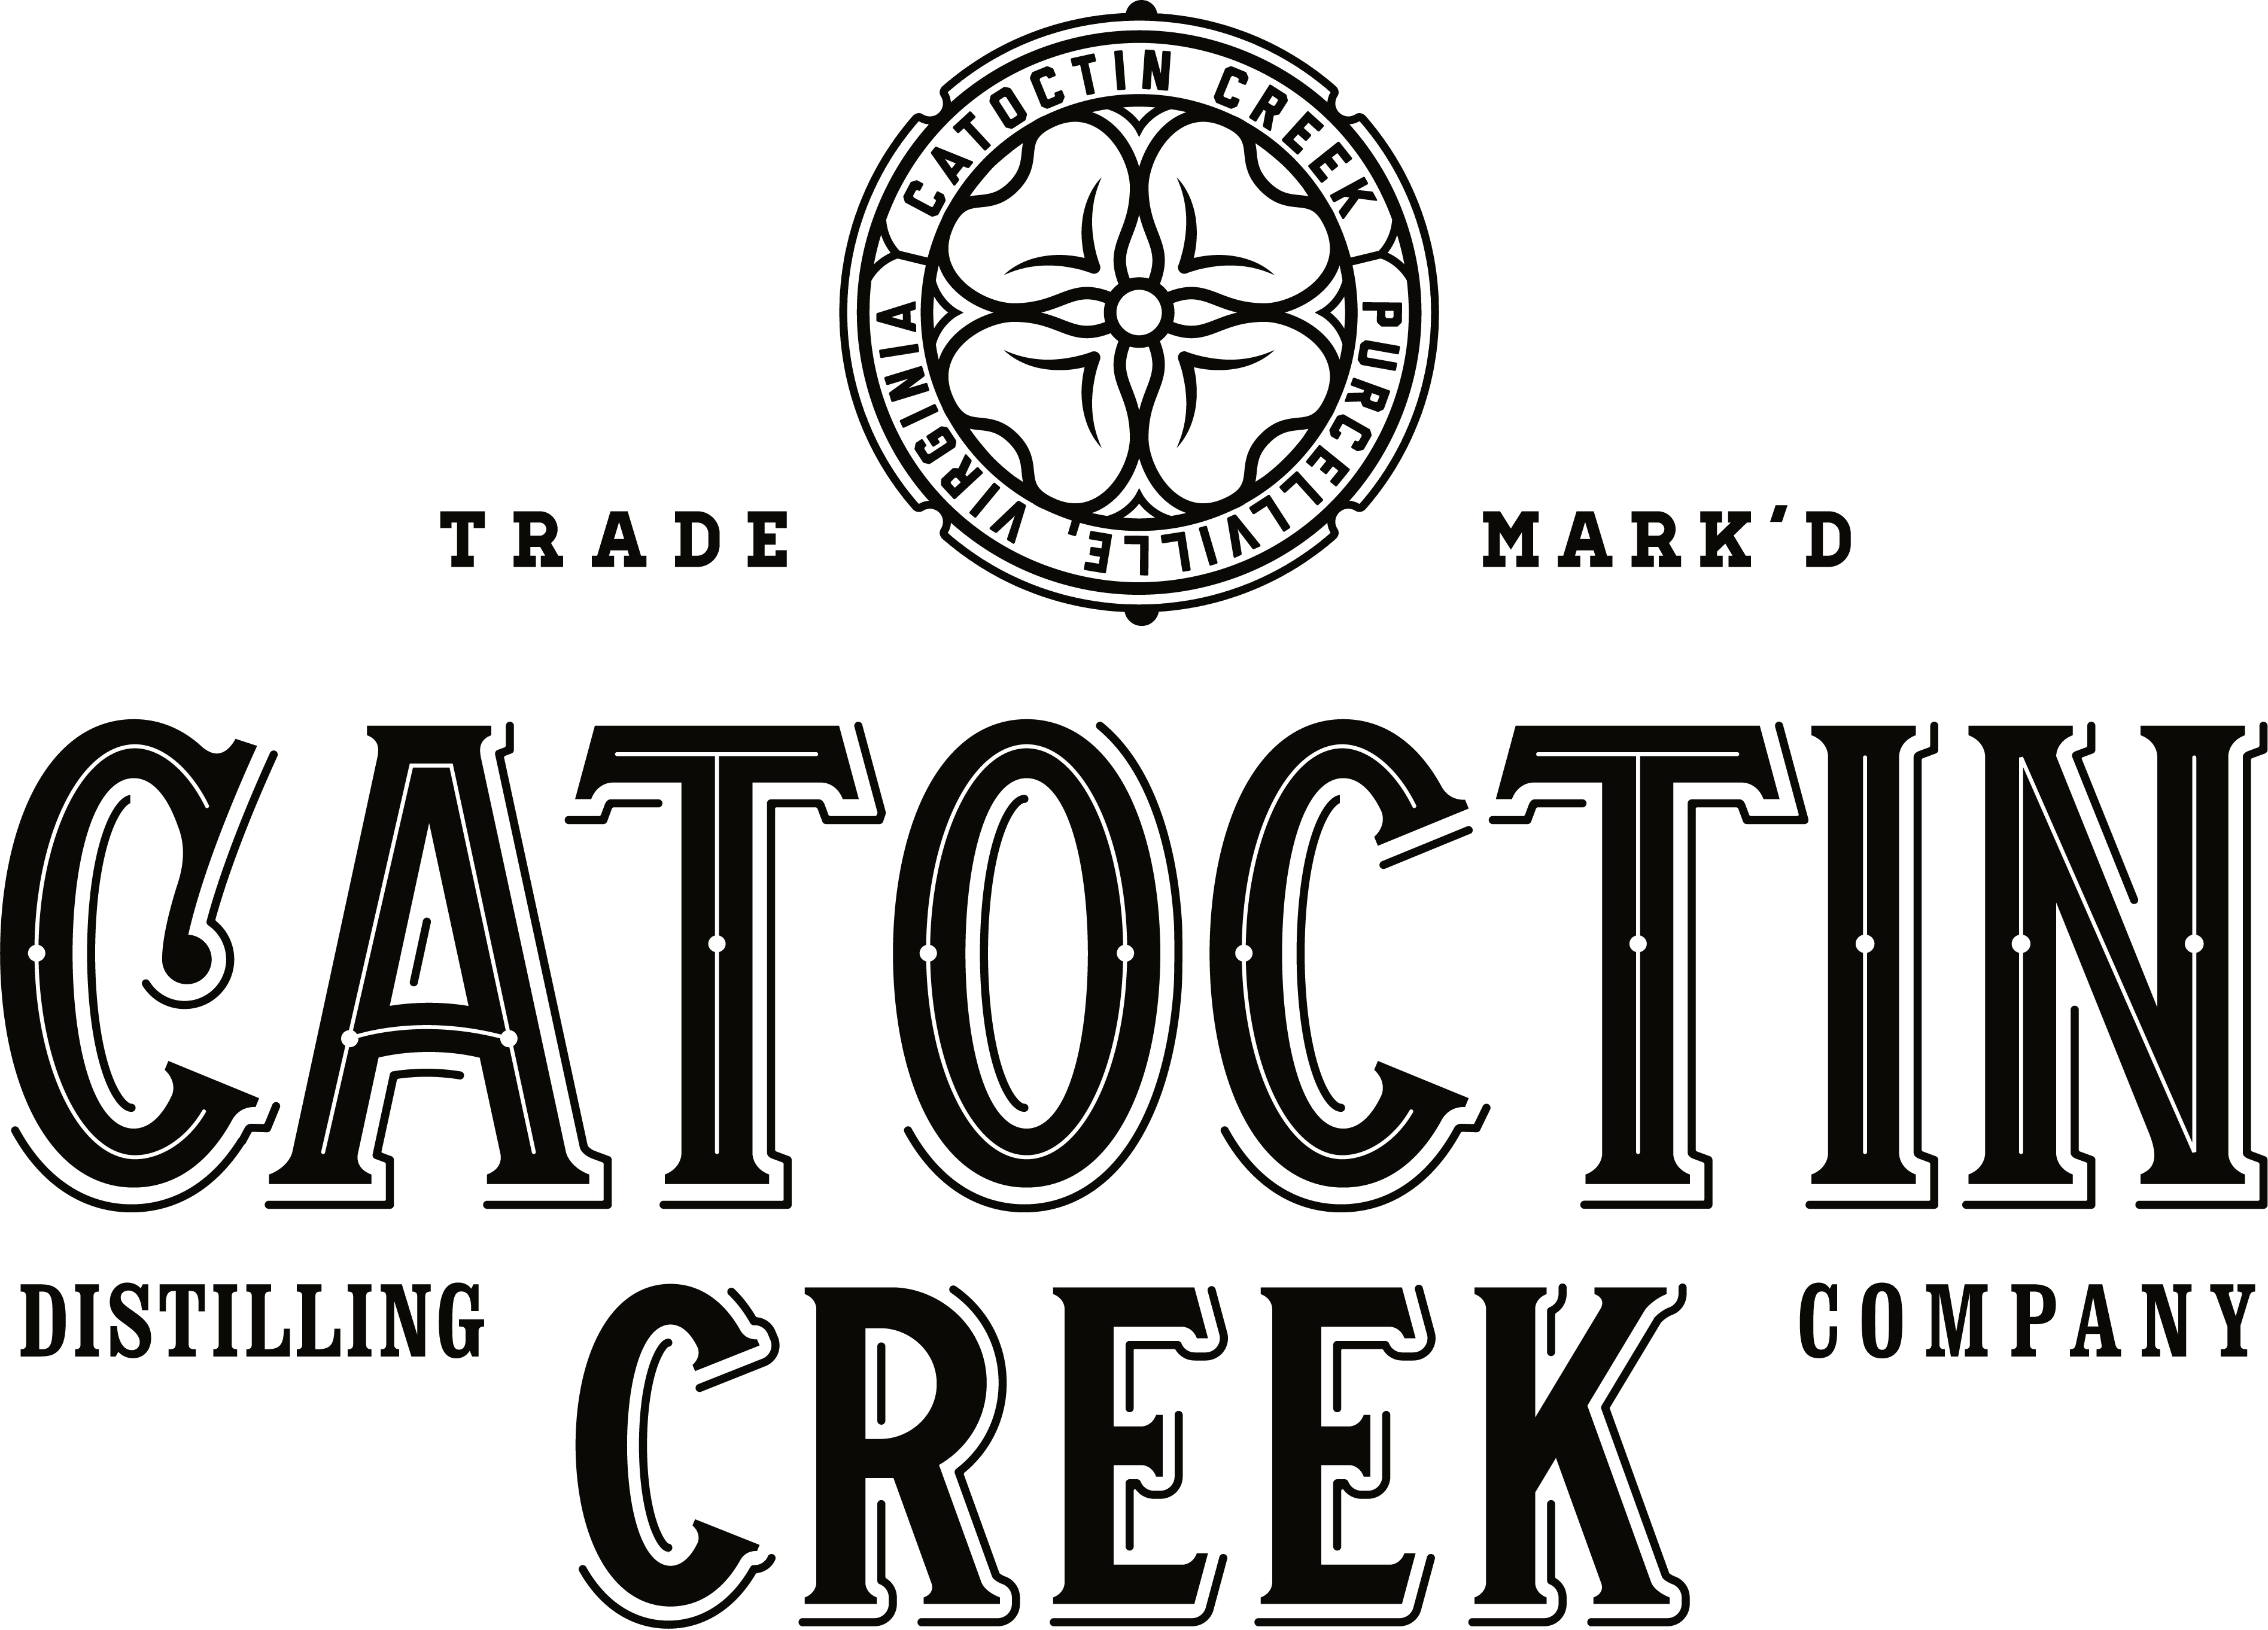 Free Whiskey Tasting With Catoctin Creek